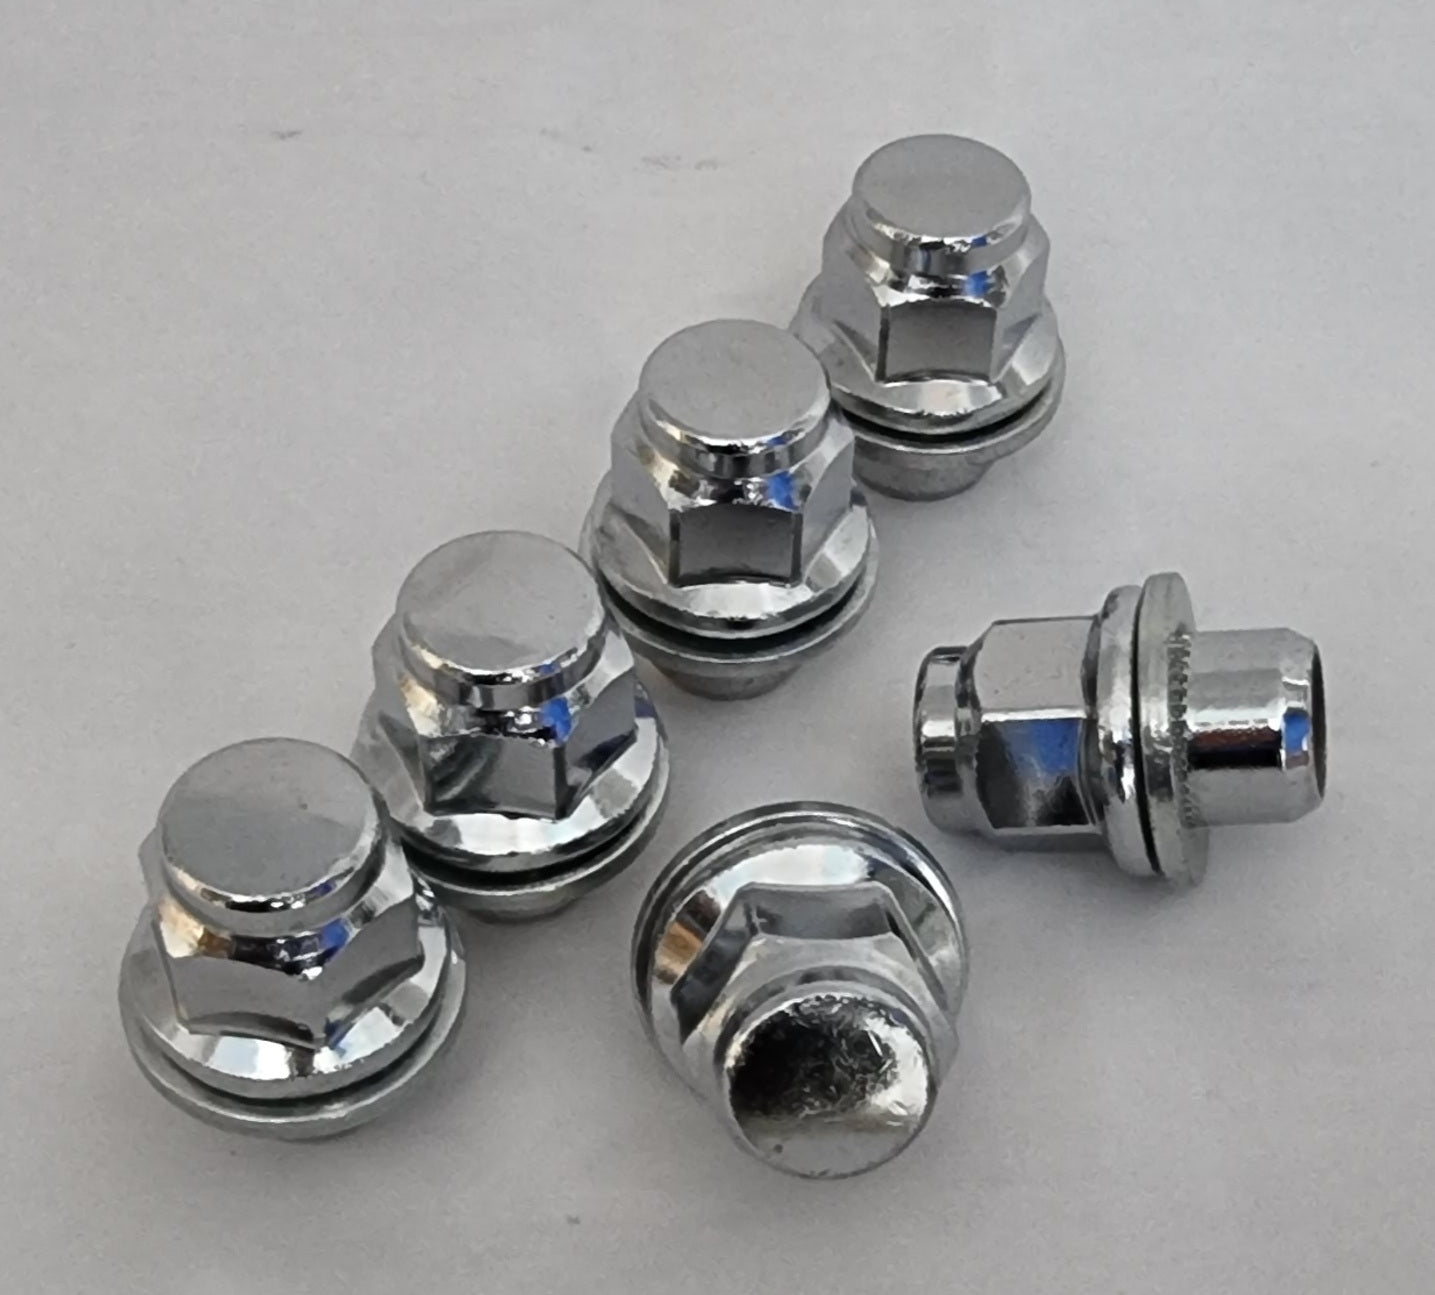 High Quality Chrome Plated Shank Style Wheel Nuts For OEM Nissan Mag Wheels